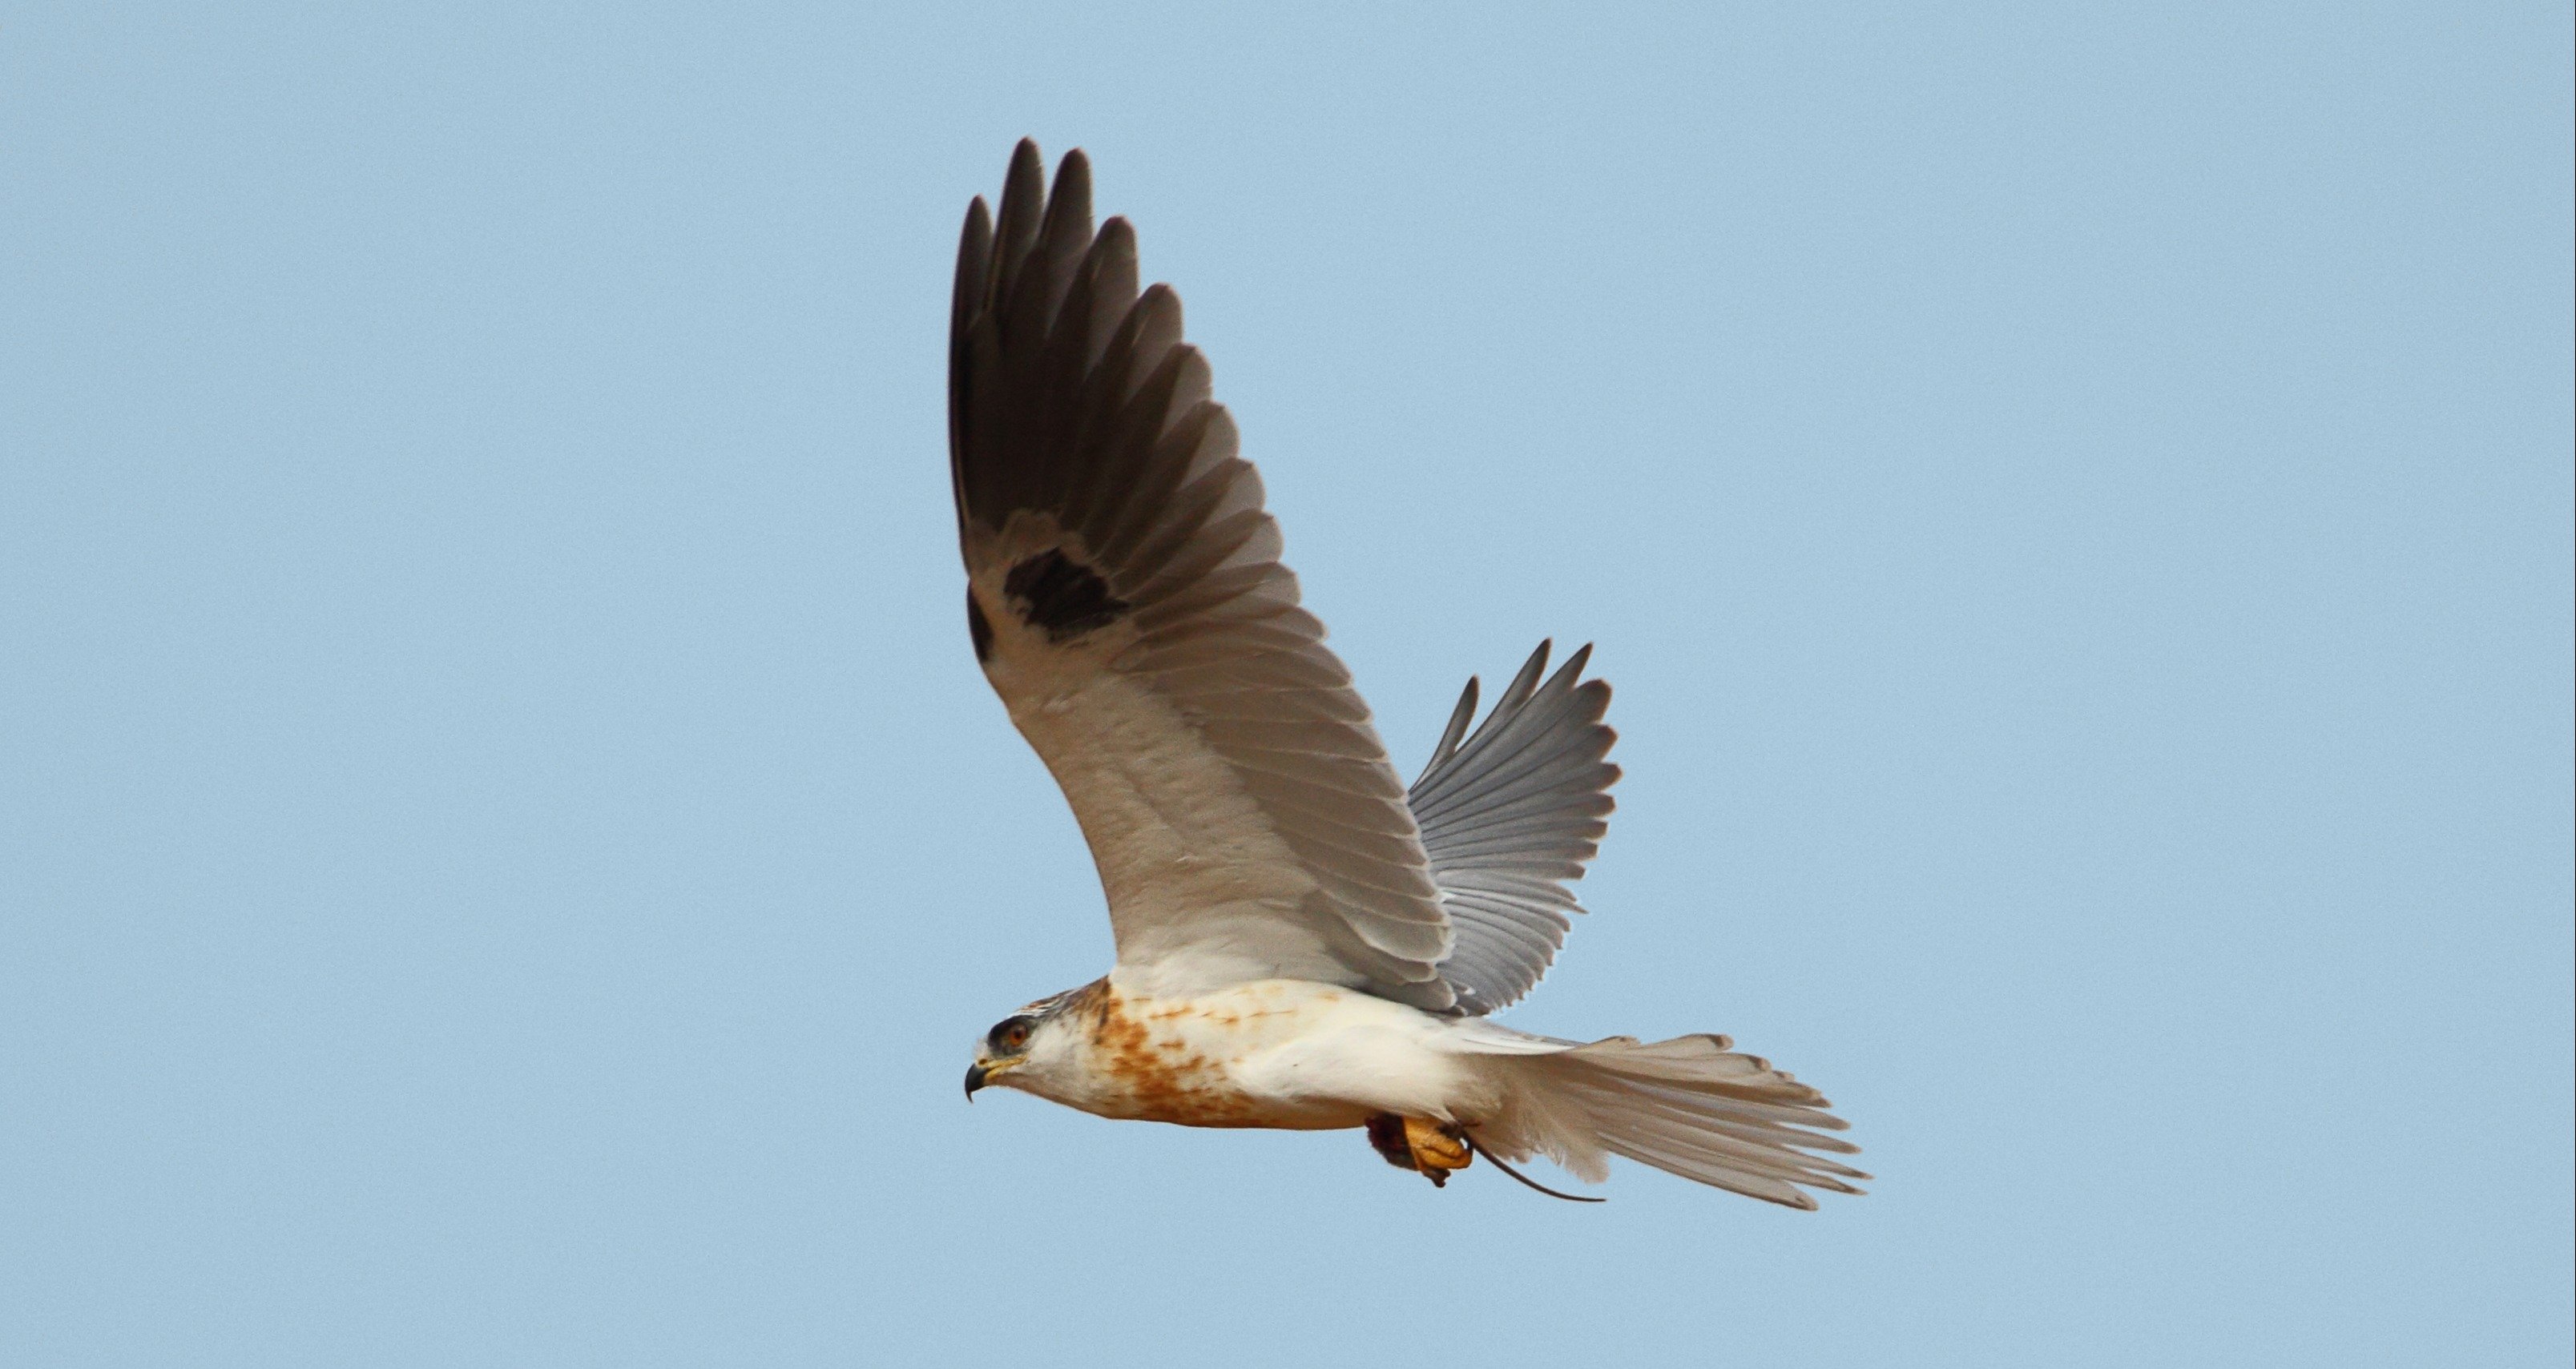 White-tailed kite flying against a blue sky